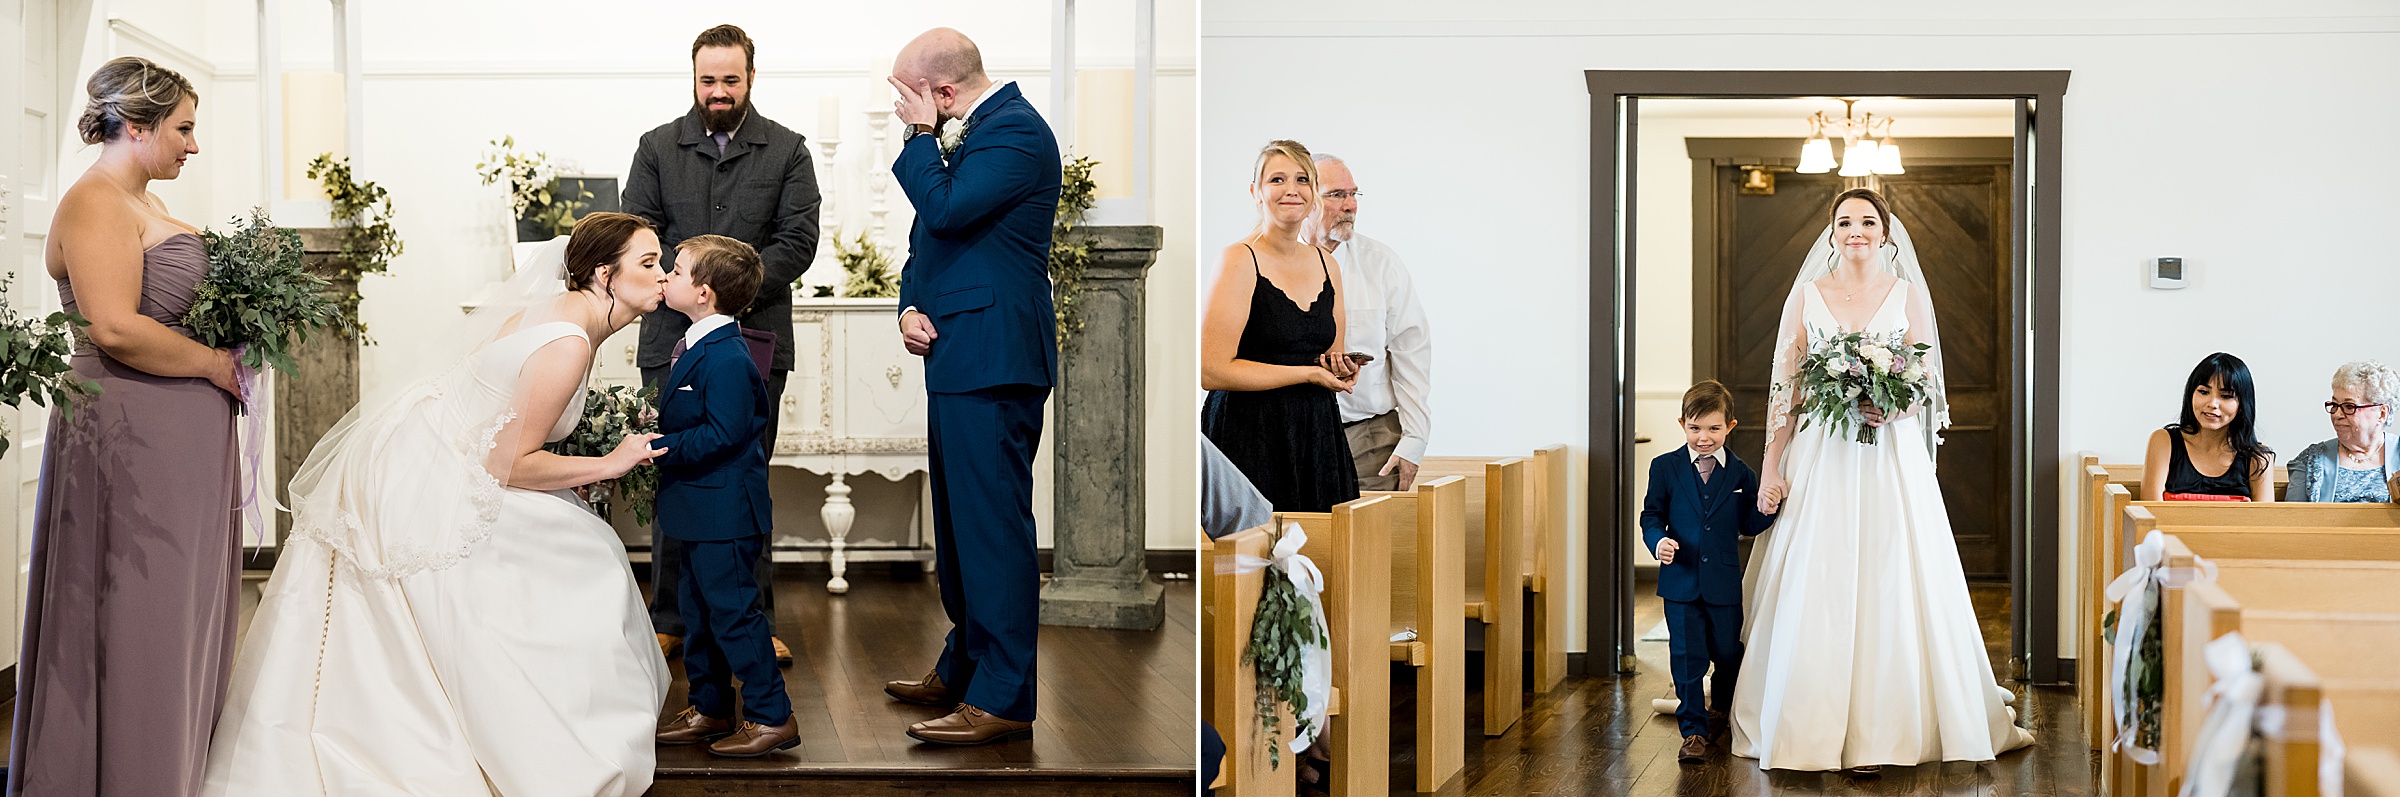 Bride gives ring bearer a kiss at the end of the aisle and groom wipes his tears; bride hold hands with the ring bearer as they walk down the aisle at All Saints Wedding Chapel by Detroit Wedding Photographer Michele Maloney